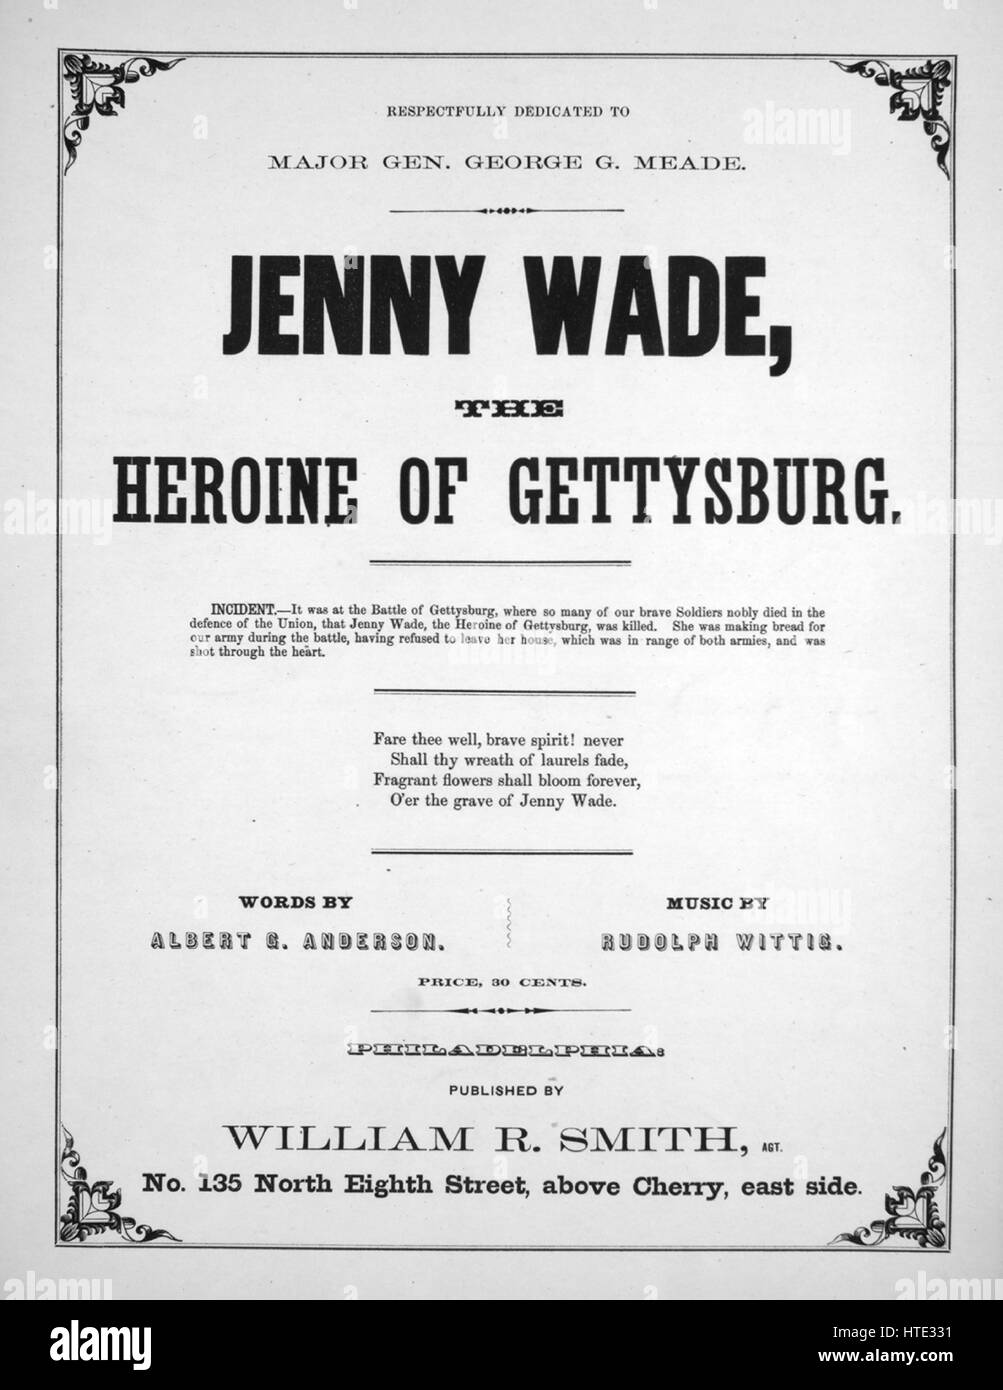 Sheet music cover image of the song 'Jenny Wade, the Heroine of Gettysburg', with original authorship notes reading 'Words by Albert G Anderson Music by Rudolph Wittig', United States, 1900. The publisher is listed as 'William R. Smith, No. 135 North Eighth Street, above Cherry, east side', the form of composition is 'strophic with chorus', the instrumentation is 'piano and voice', the first line reads 'Raise high the monumental pile of marble pur and white!', and the illustration artist is listed as 'Electrotyped by L. Johnson and Co., Philadelphia'. Stock Photo